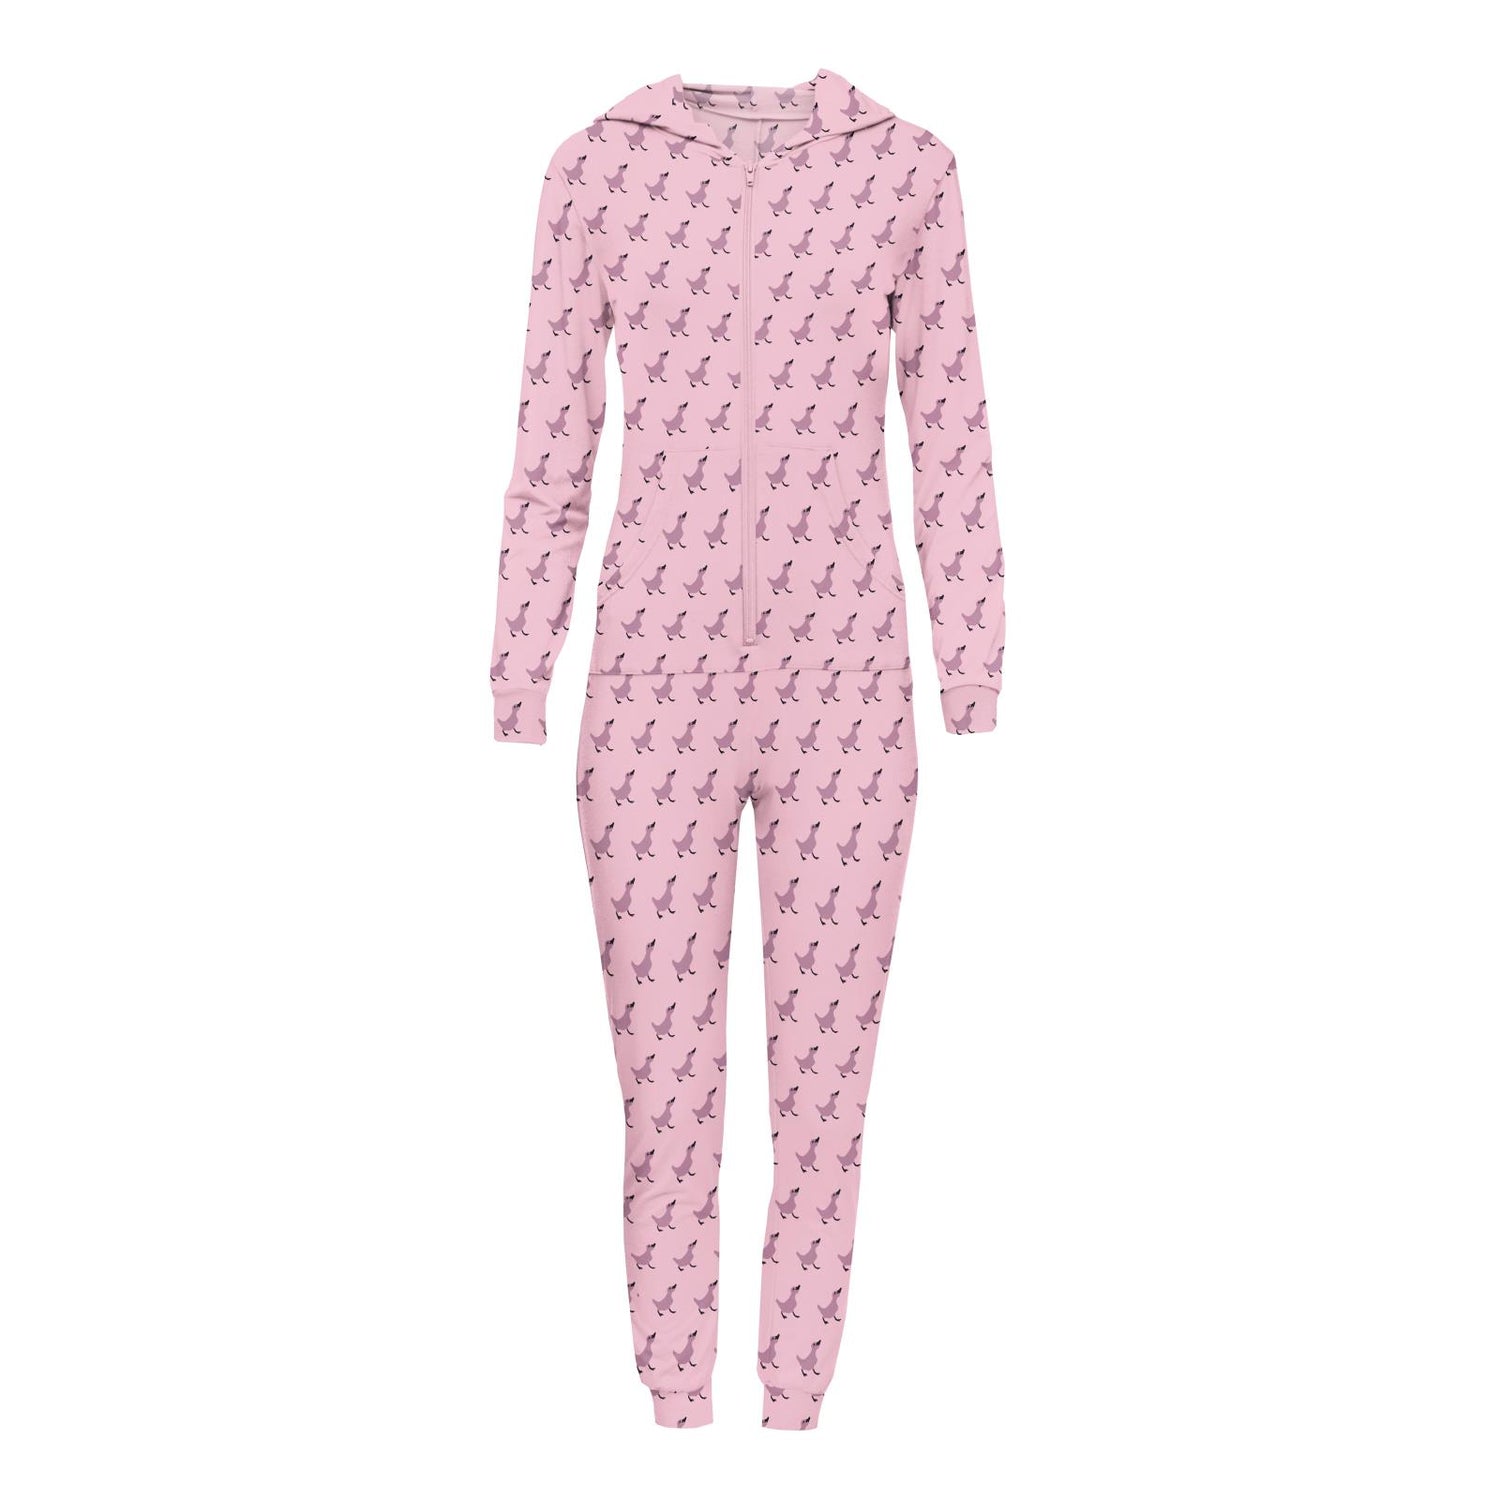 Women's Print Long Sleeve Jumpsuit with Hood in Cake Pop Ugly Duckling